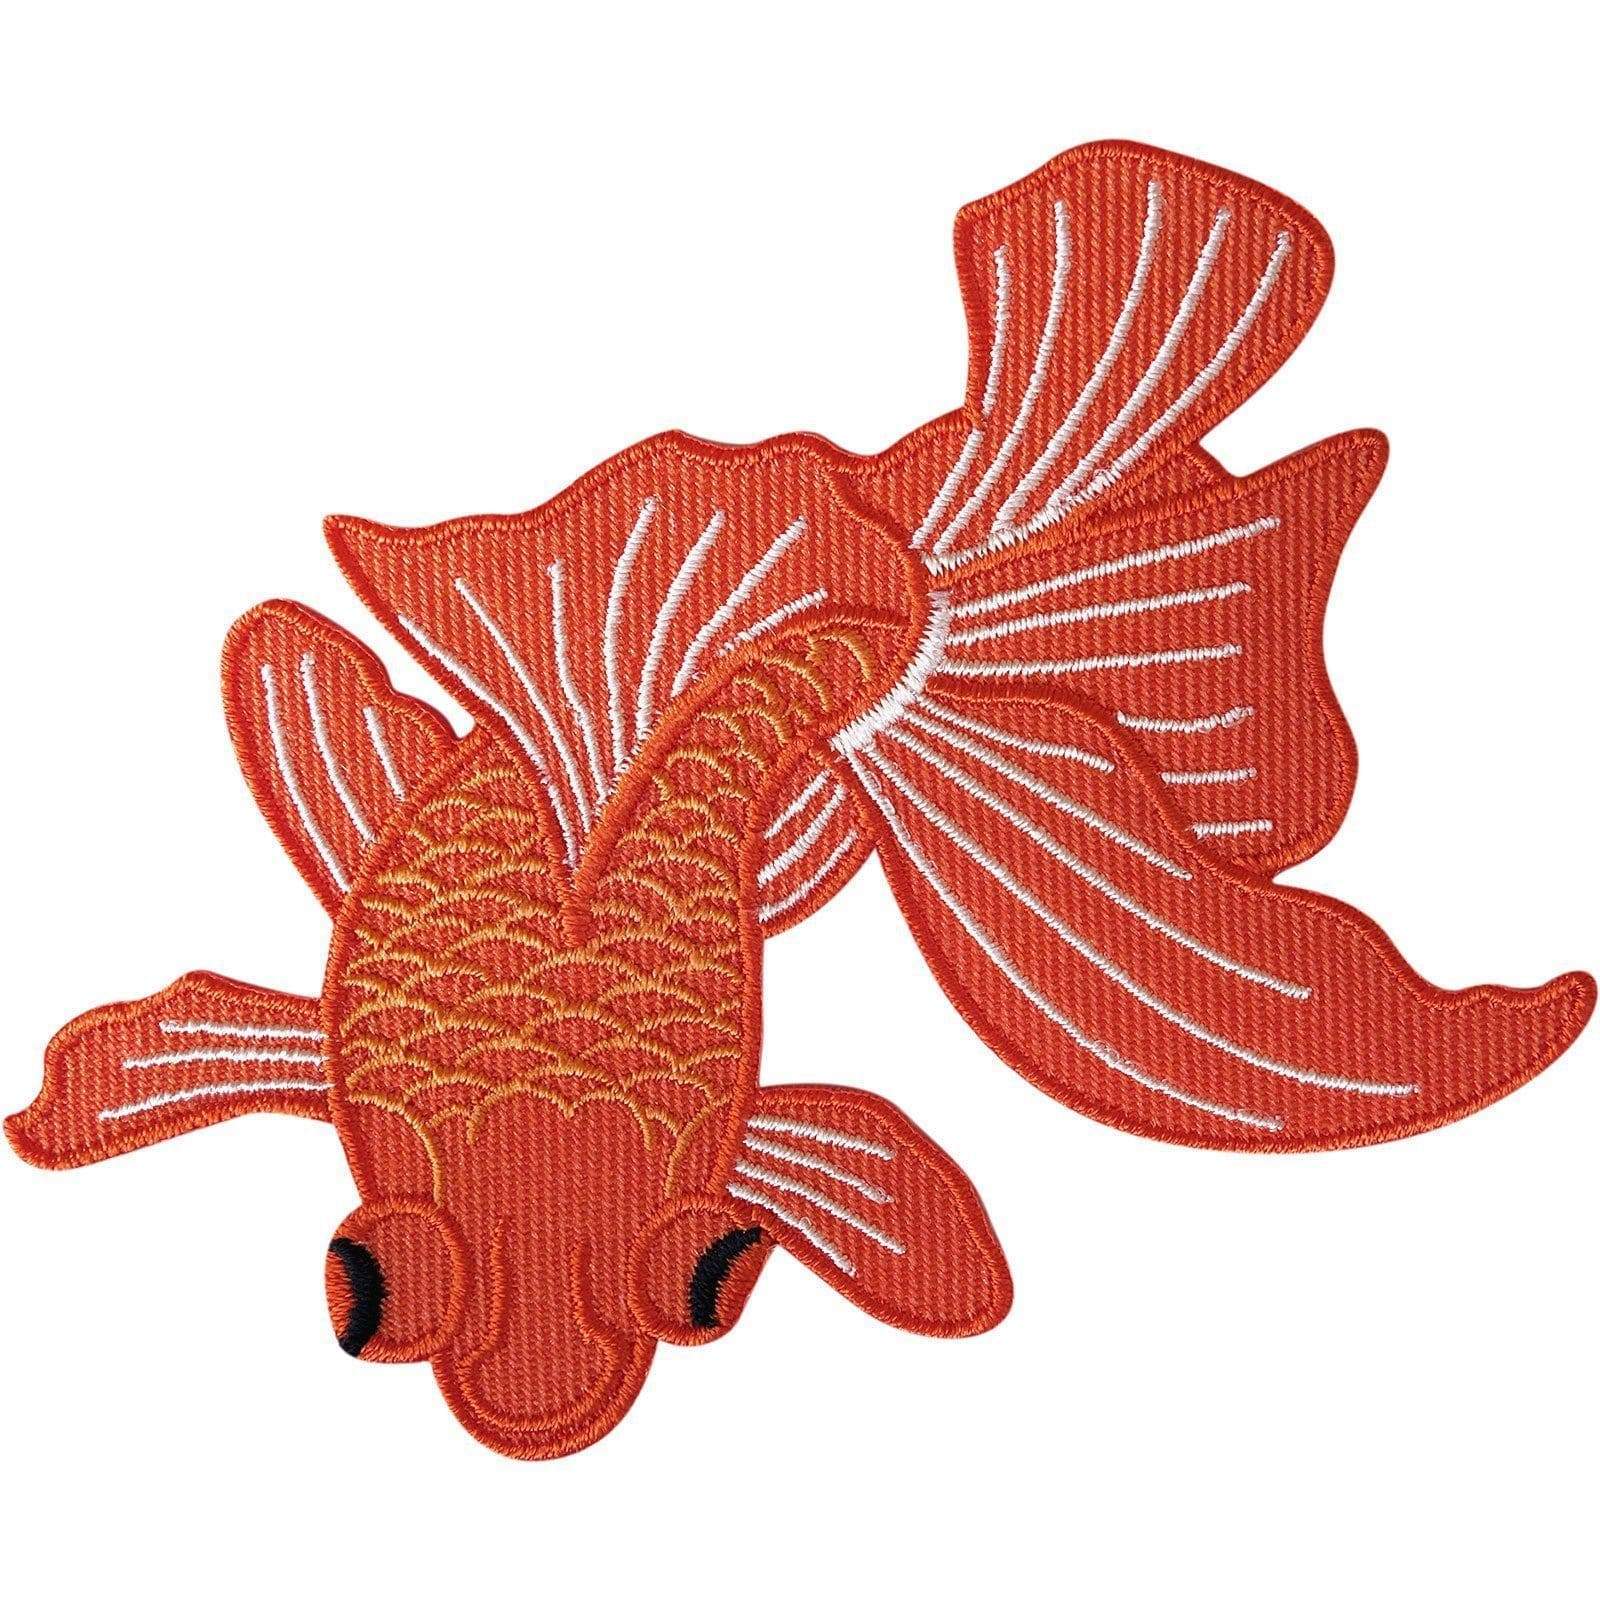 Goldfish Patch Iron On Sew On Embroidered Badge Embroidery Applique Big Eye Fish